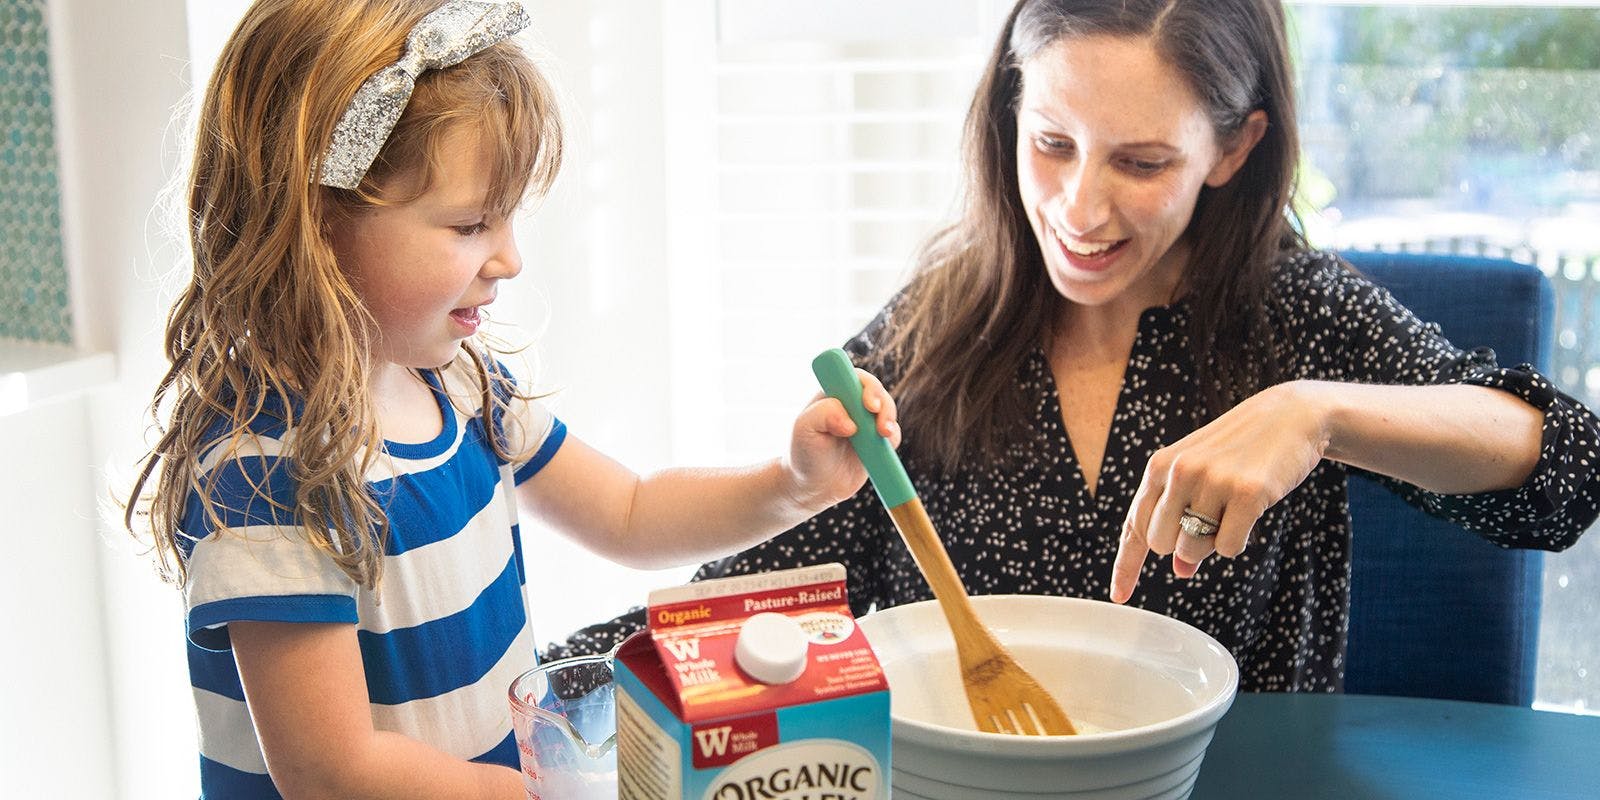 Lauren Manaker and her daughter stir dairy in a mixing bowl. Photo by Jackie Stofsick.